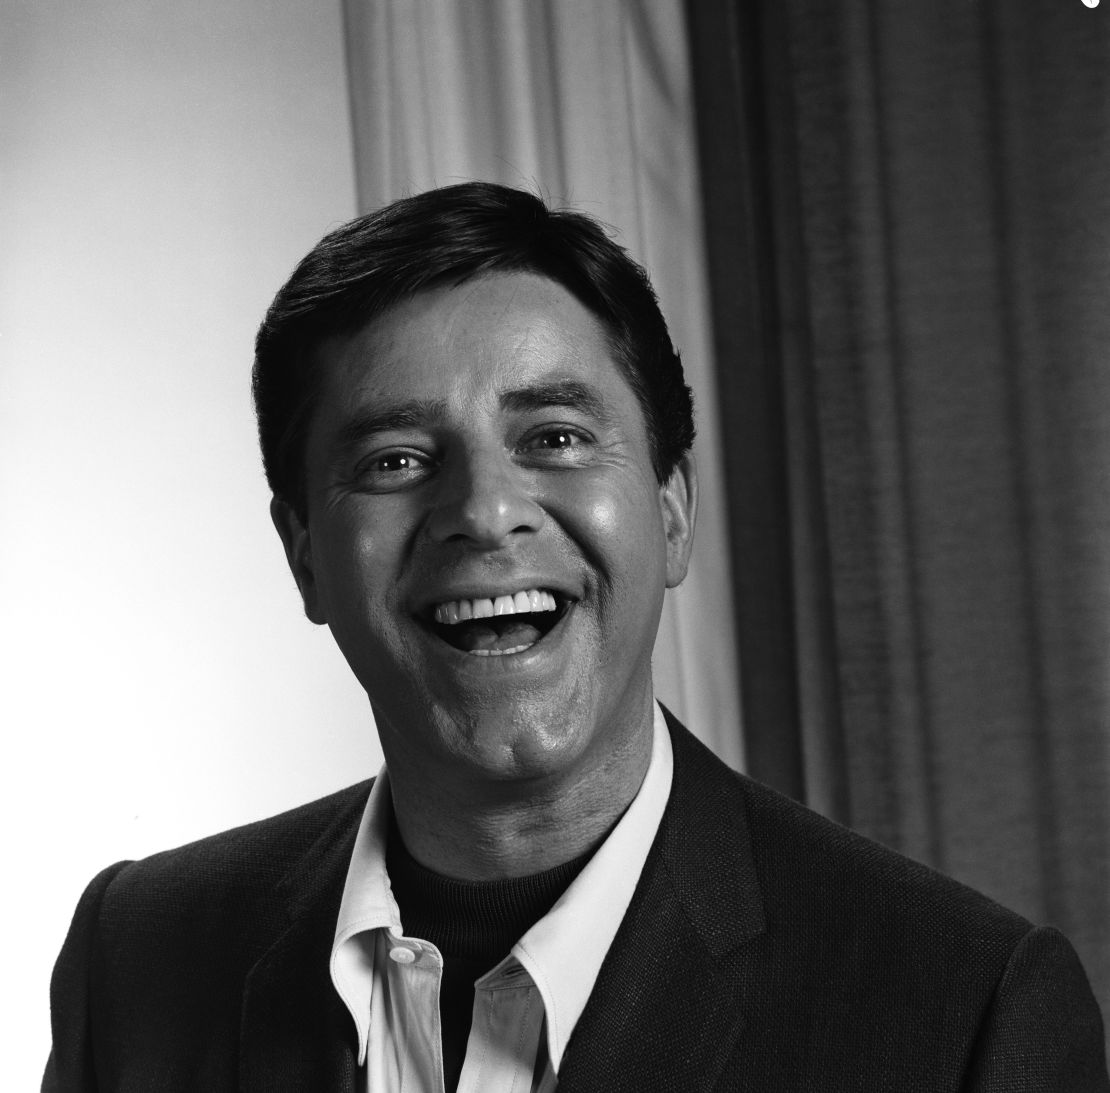 A promotional photo from "The Jerry Lewis Show," which aired in 1963.